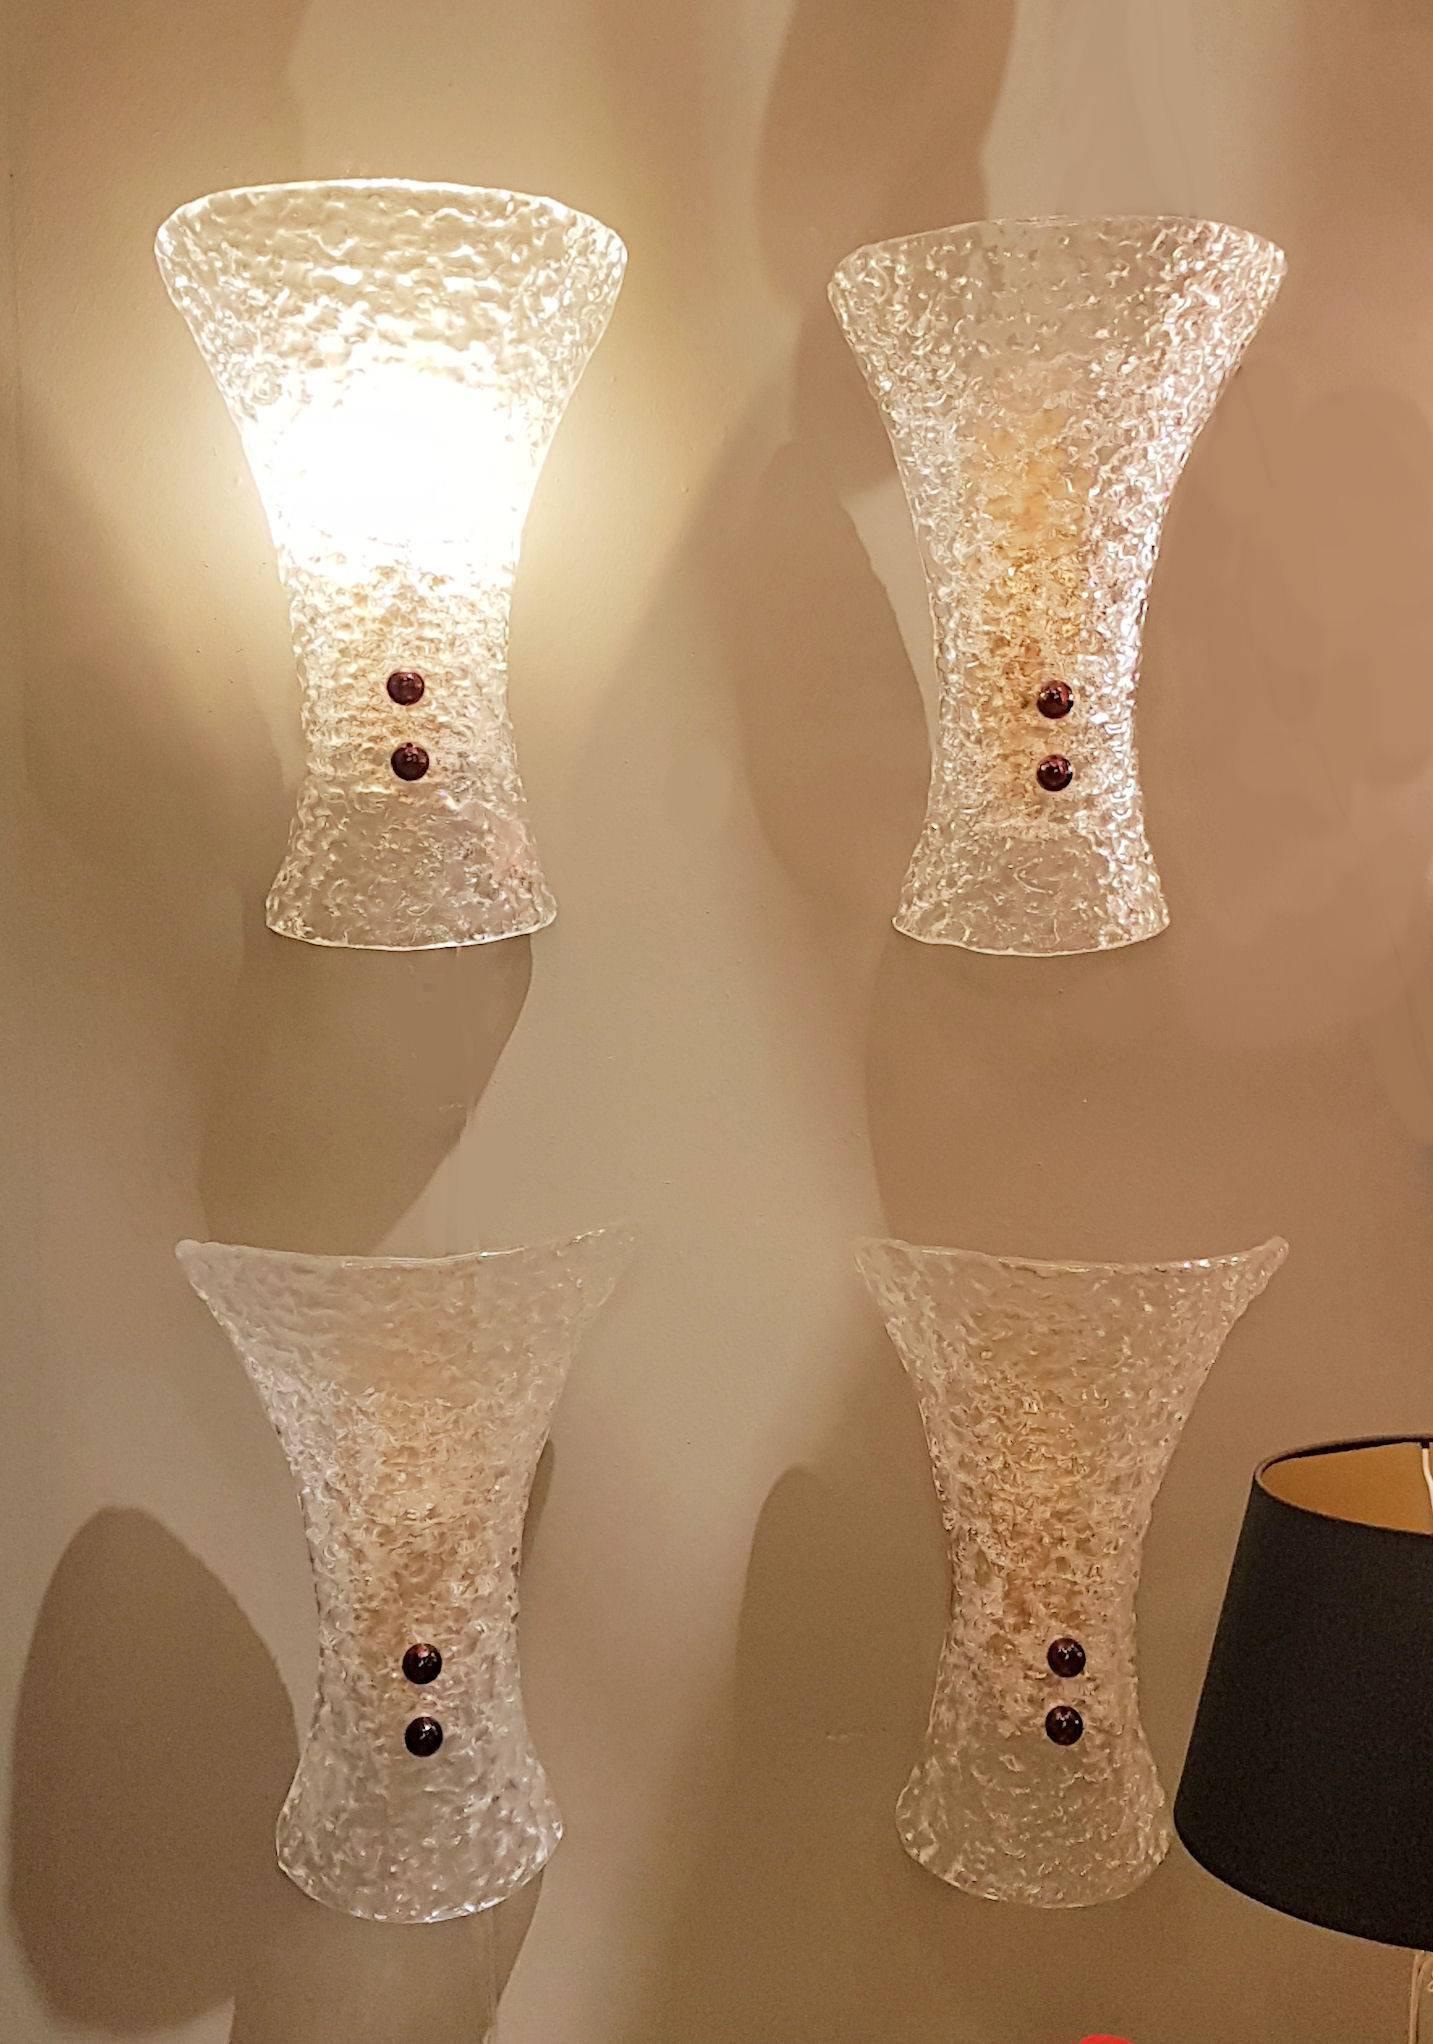 Two pairs of Murano Mid-Century Modern sconces.
Textured clear glass, on the inside surface, with two purple glass screws, on a brass mount.
One candelabra base light each, rewired.
Beautiful quality glass work, in the style of Barovier e